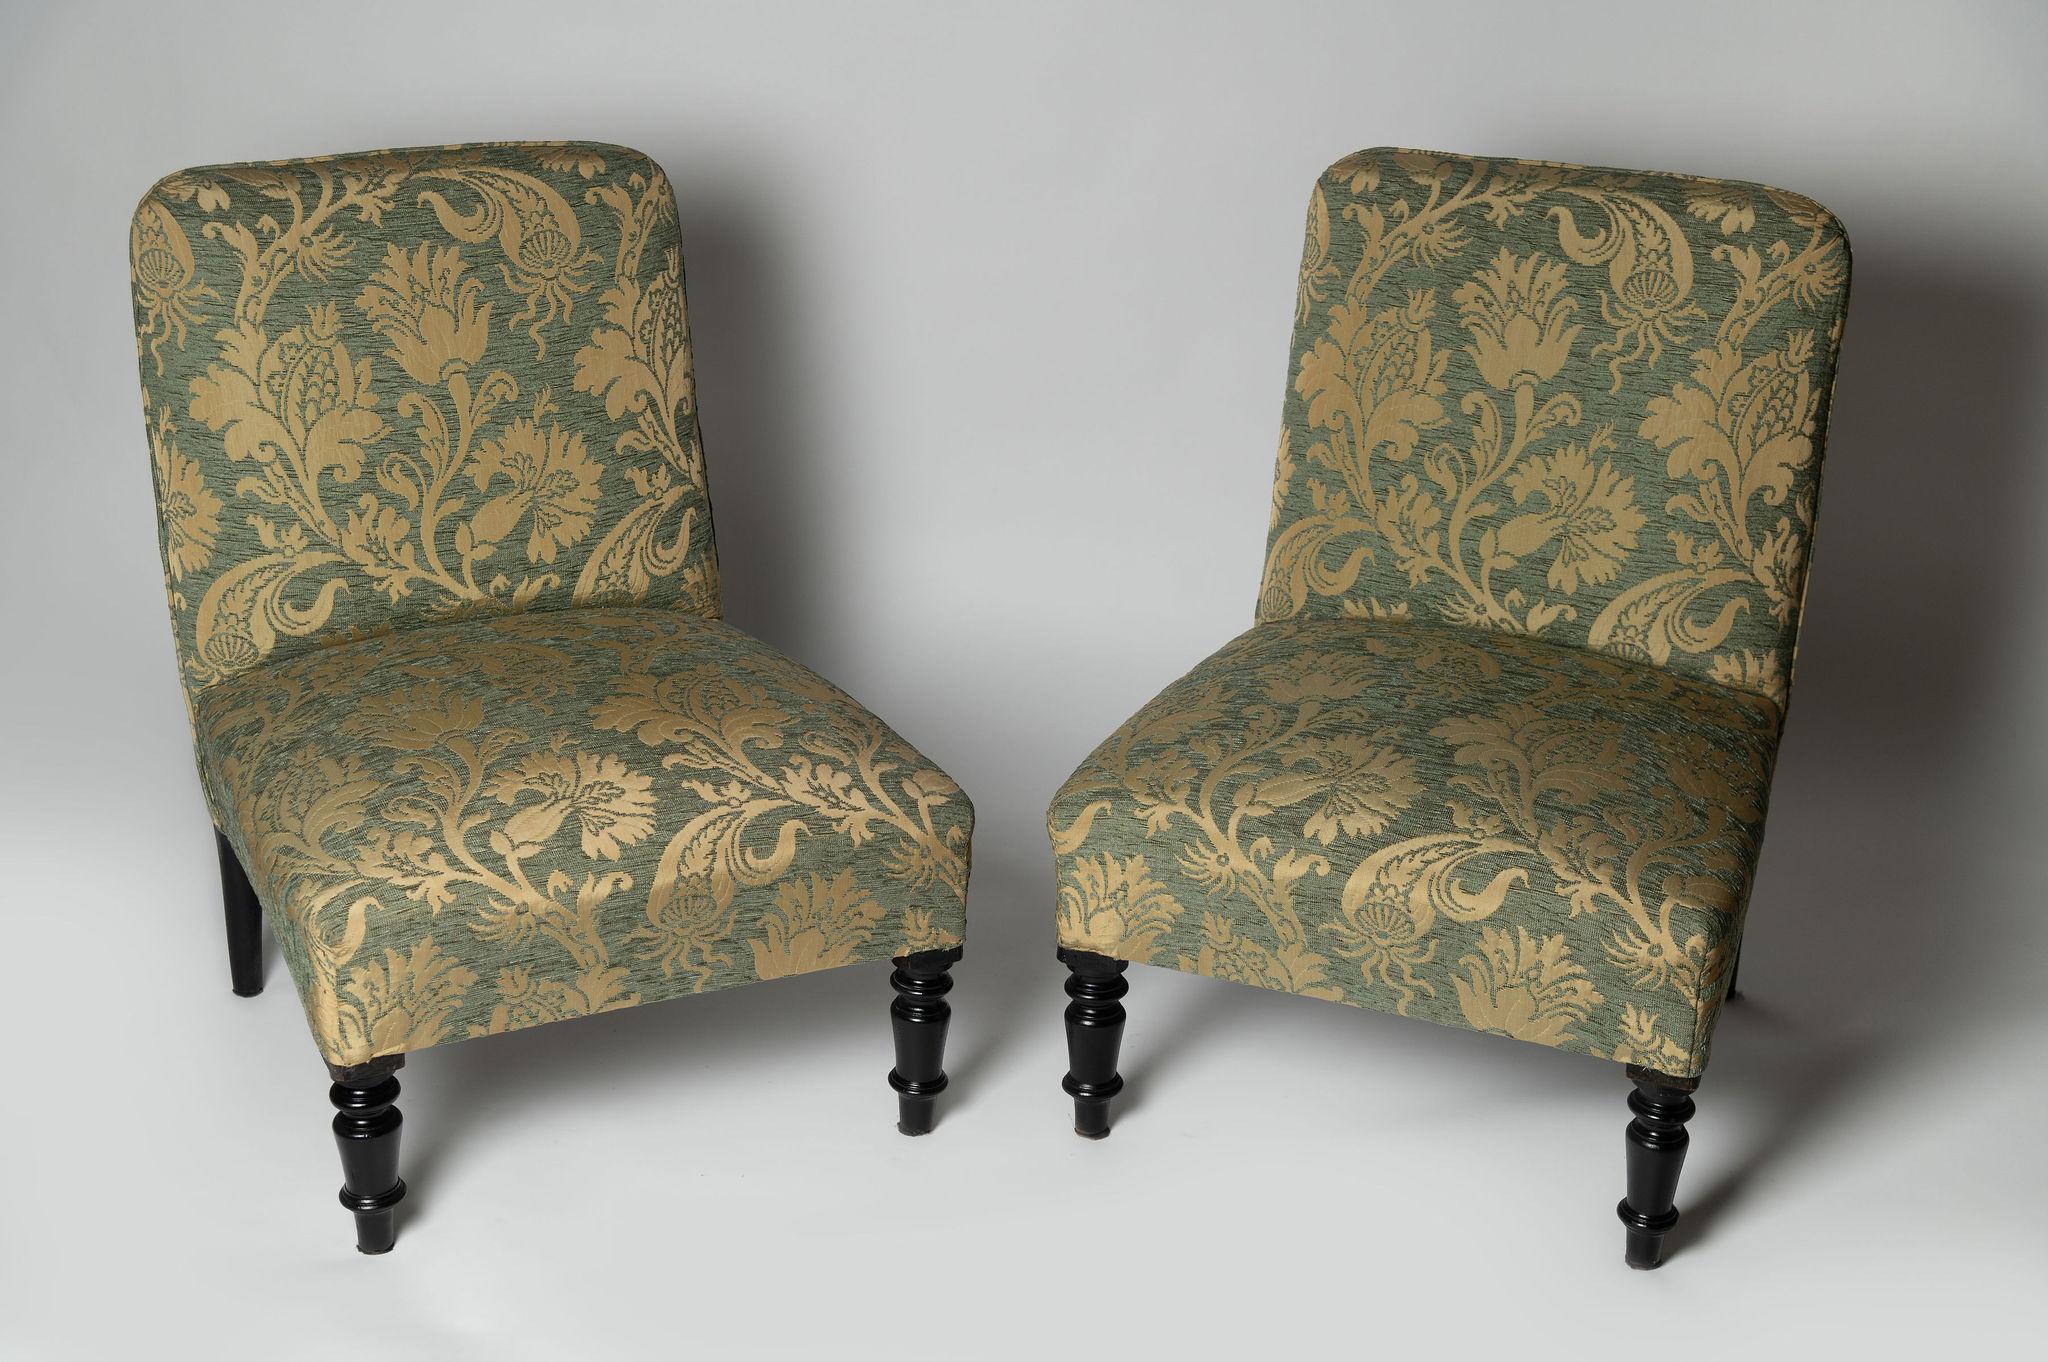 Antique French pair of Napoleon III slipper chairs. Ready for upholstery. Seat depth 19″. They are being sold ready for upholstery not as upholstered finished chairs. Ideal fireside, occasional or bedroom chairs. 